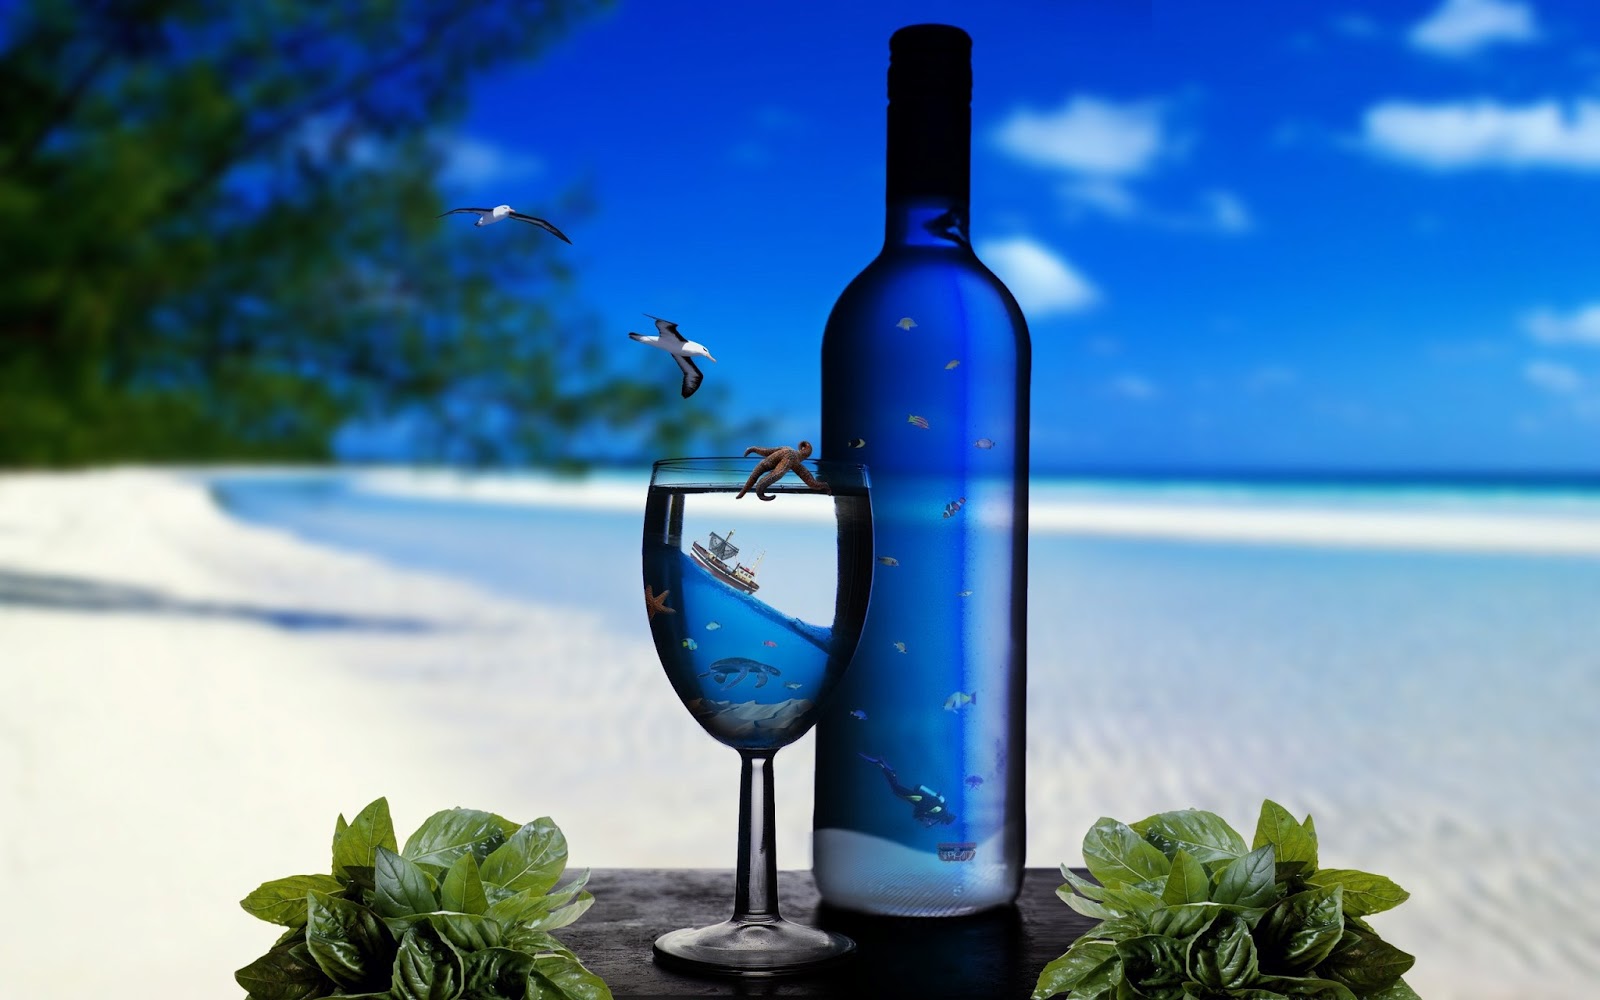 Drinks hd wallpapers, high definition free wallpapers Amazing